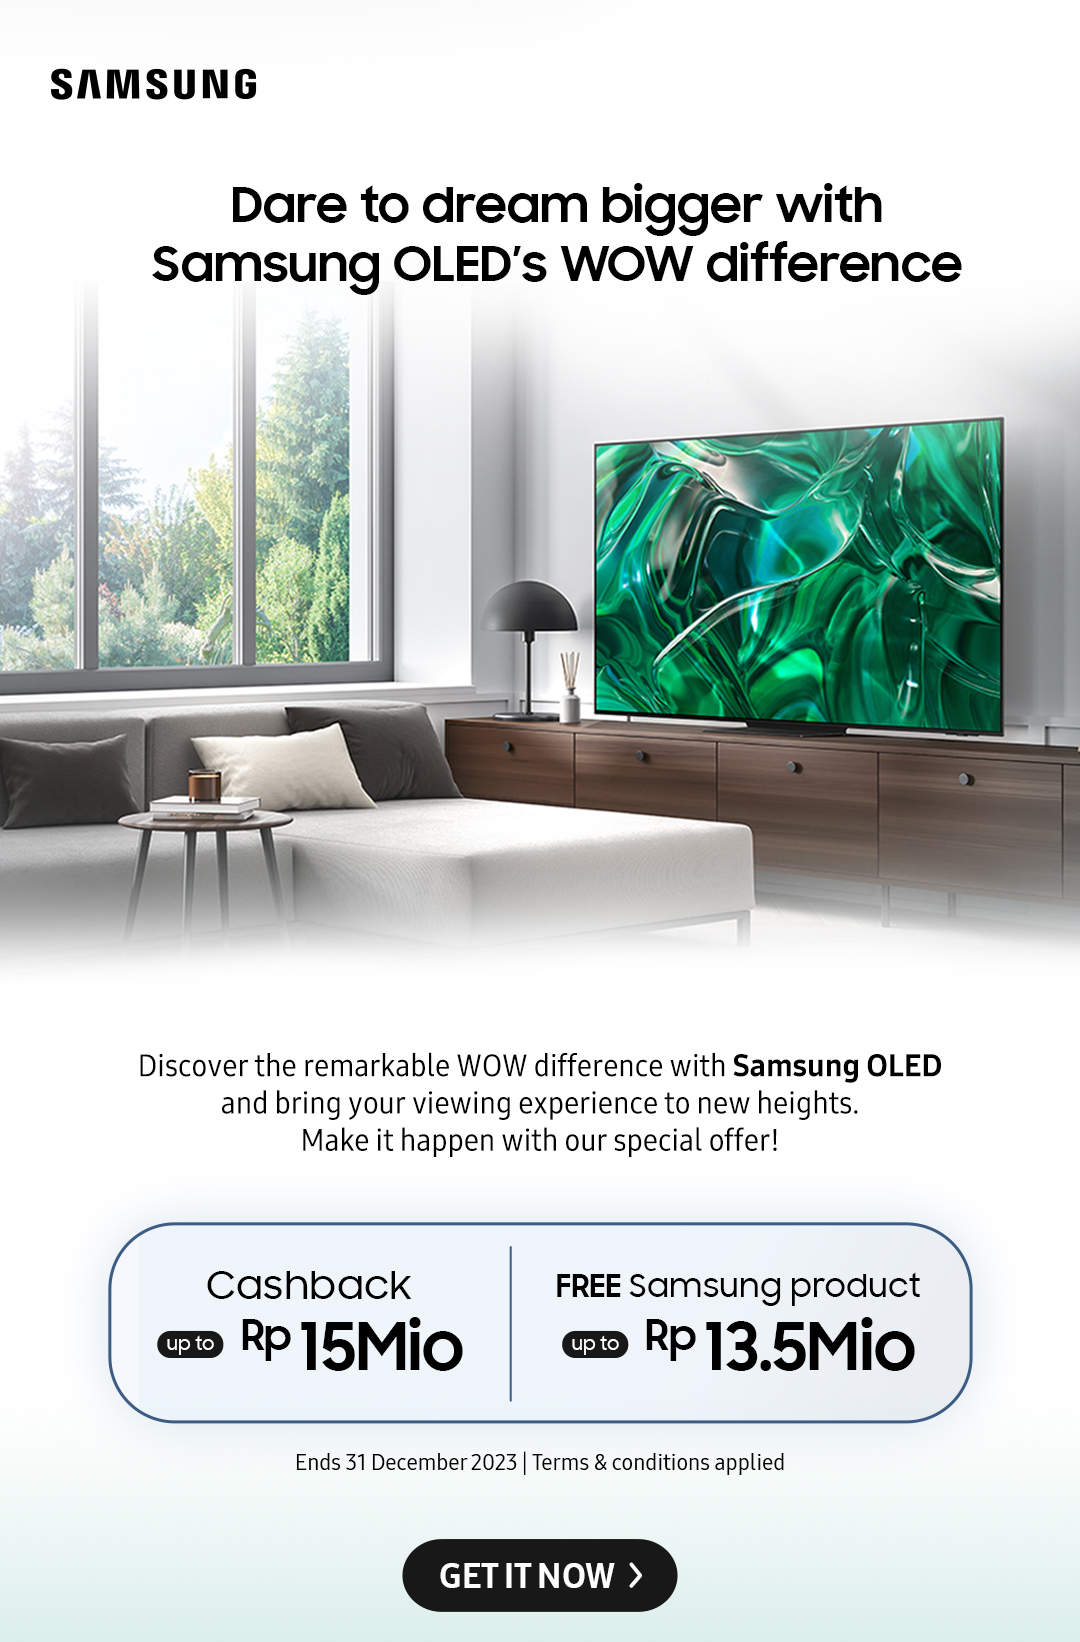 Dare to dream bigger with Samsung OLED's WOW difference | Discover the remarkable WOW difference with Samsung OLED and bring your viewing experience to new heights. Make it happen with our special offer! Click here to get it now!